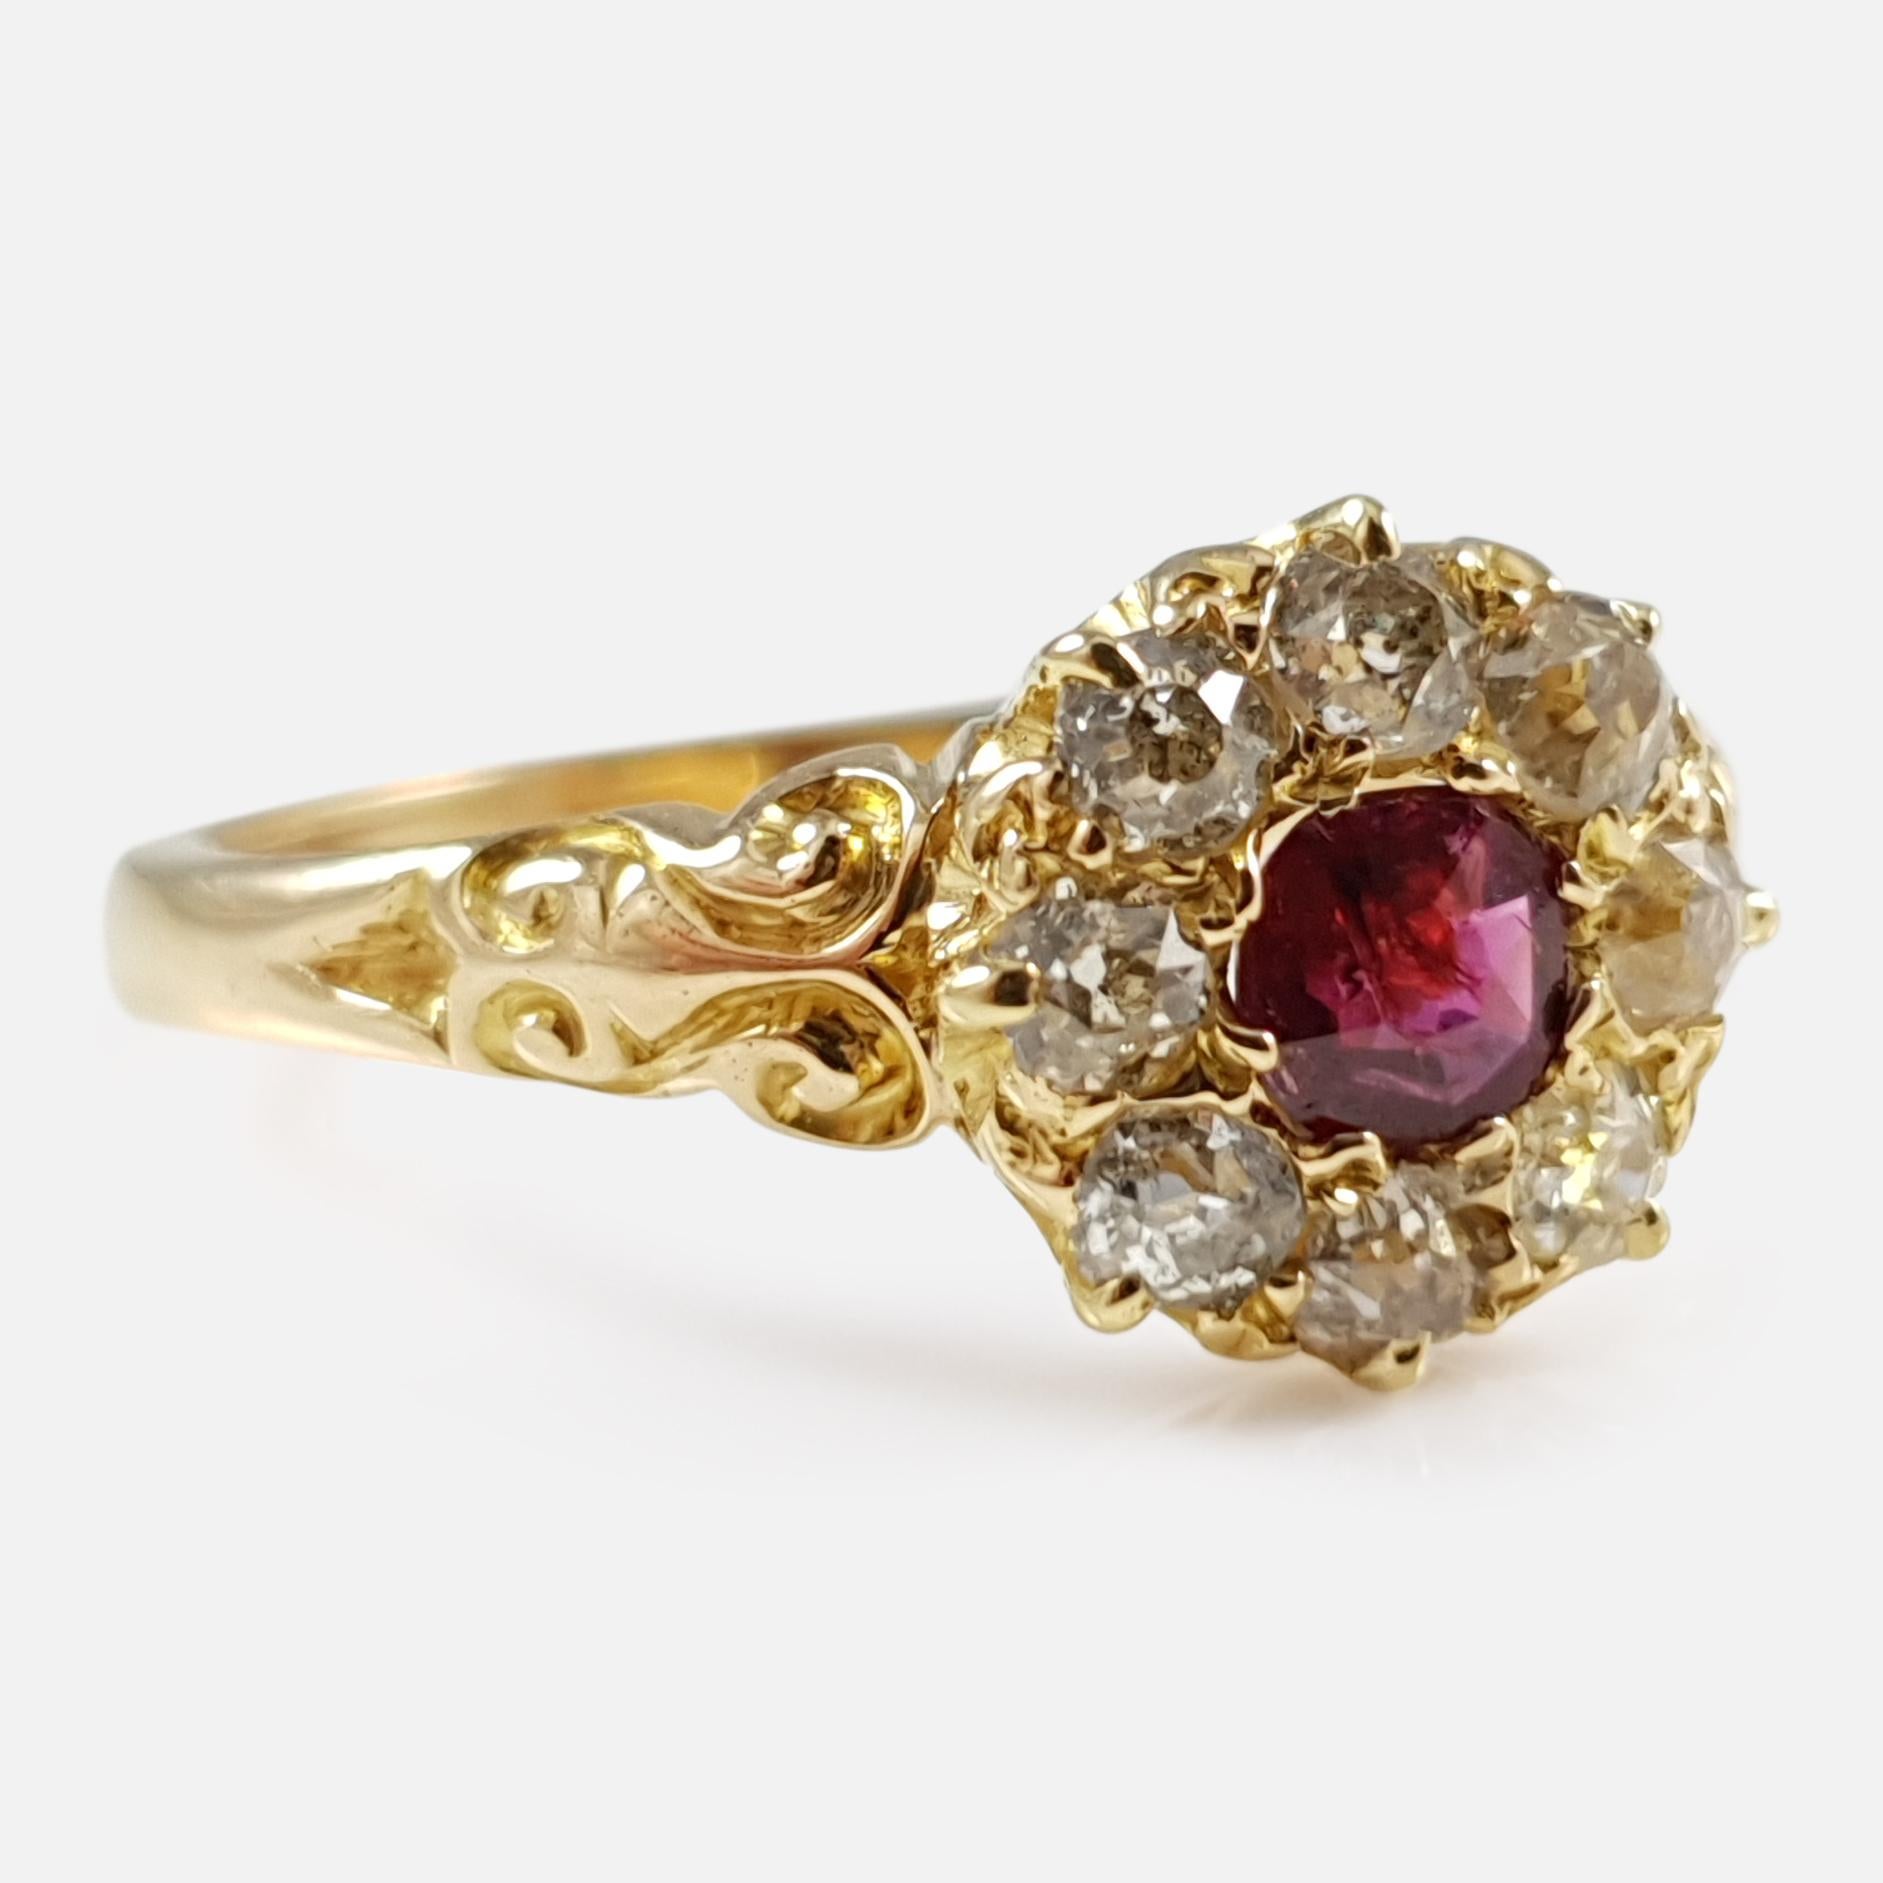 A stunning and extremely stylish Edwardian period 18 karat yellow gold ruby & diamond cluster ring - circa 1905. The ring is set with a central ruby weighing approximately 0.23cts, surrounded by a further eight old cut diamonds in a cluster